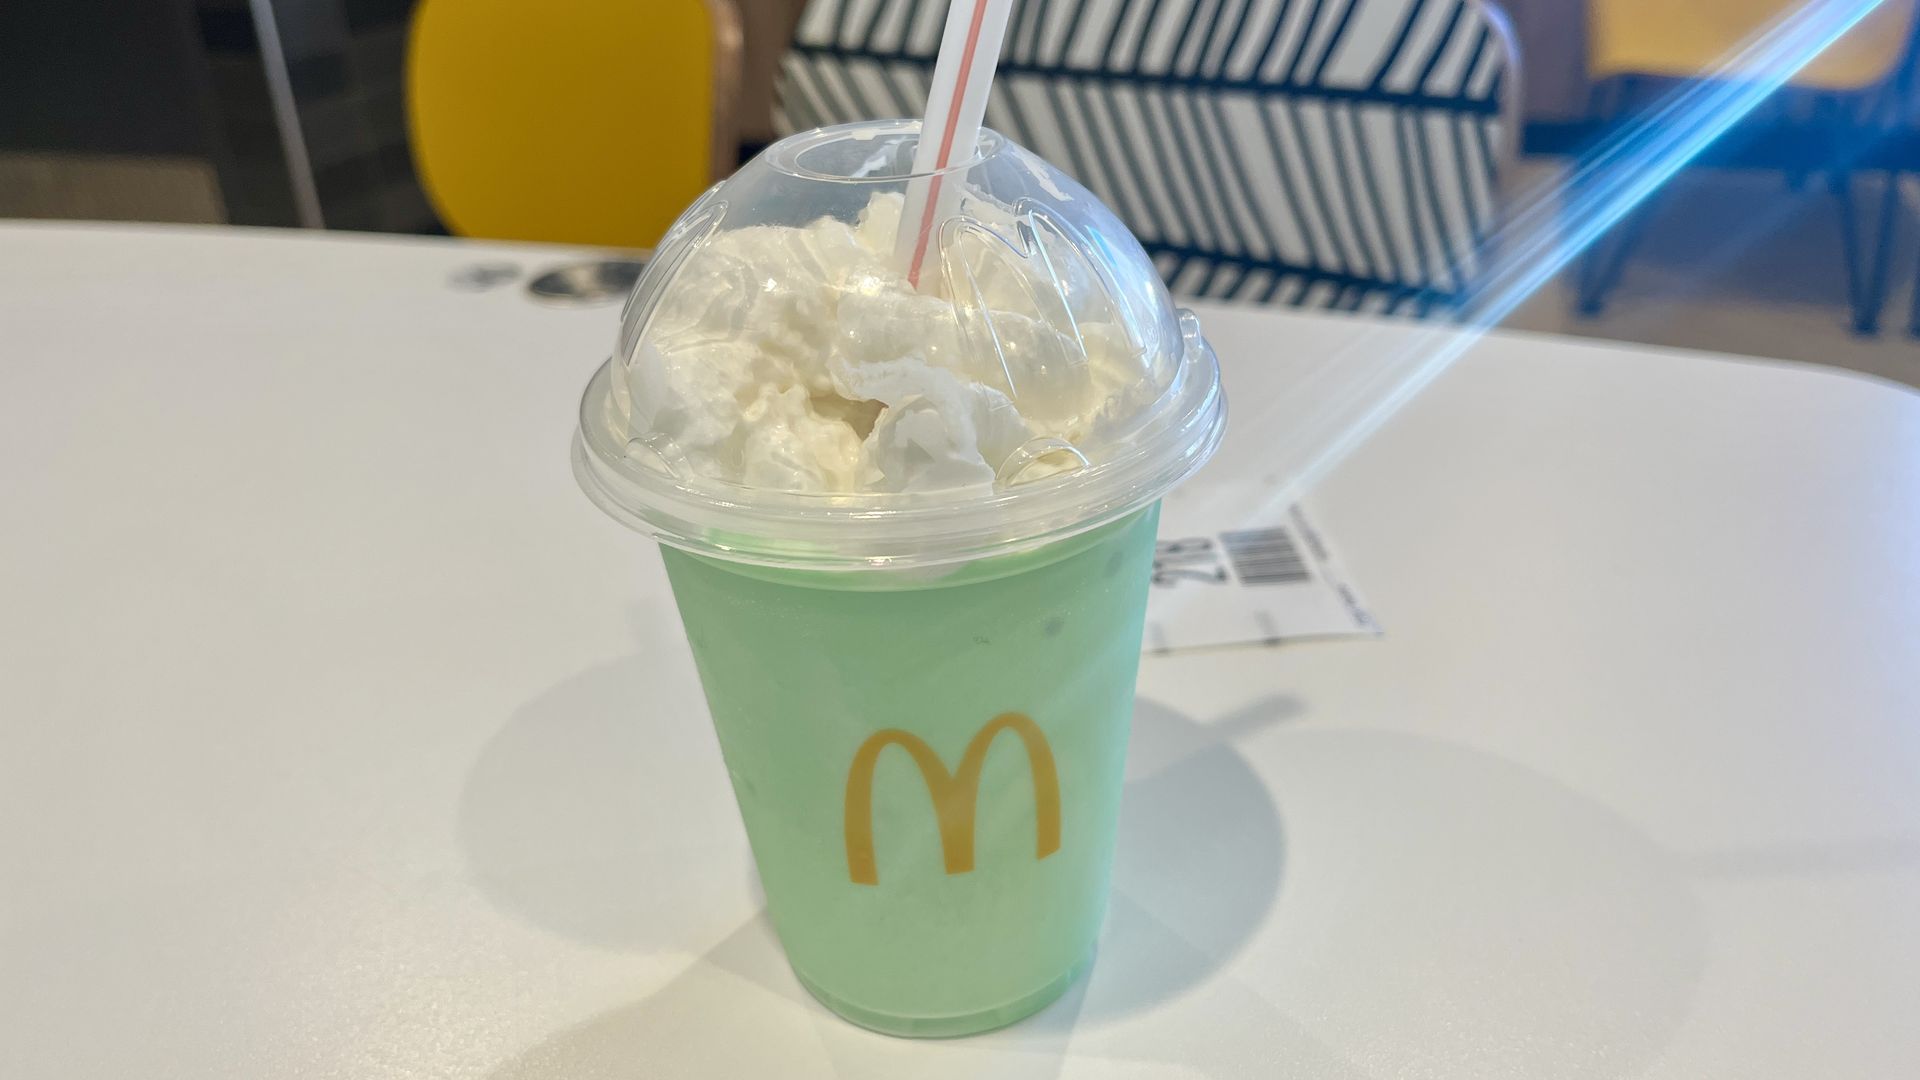 McDonald's Shamrock Shake with whipped cream and a straw.